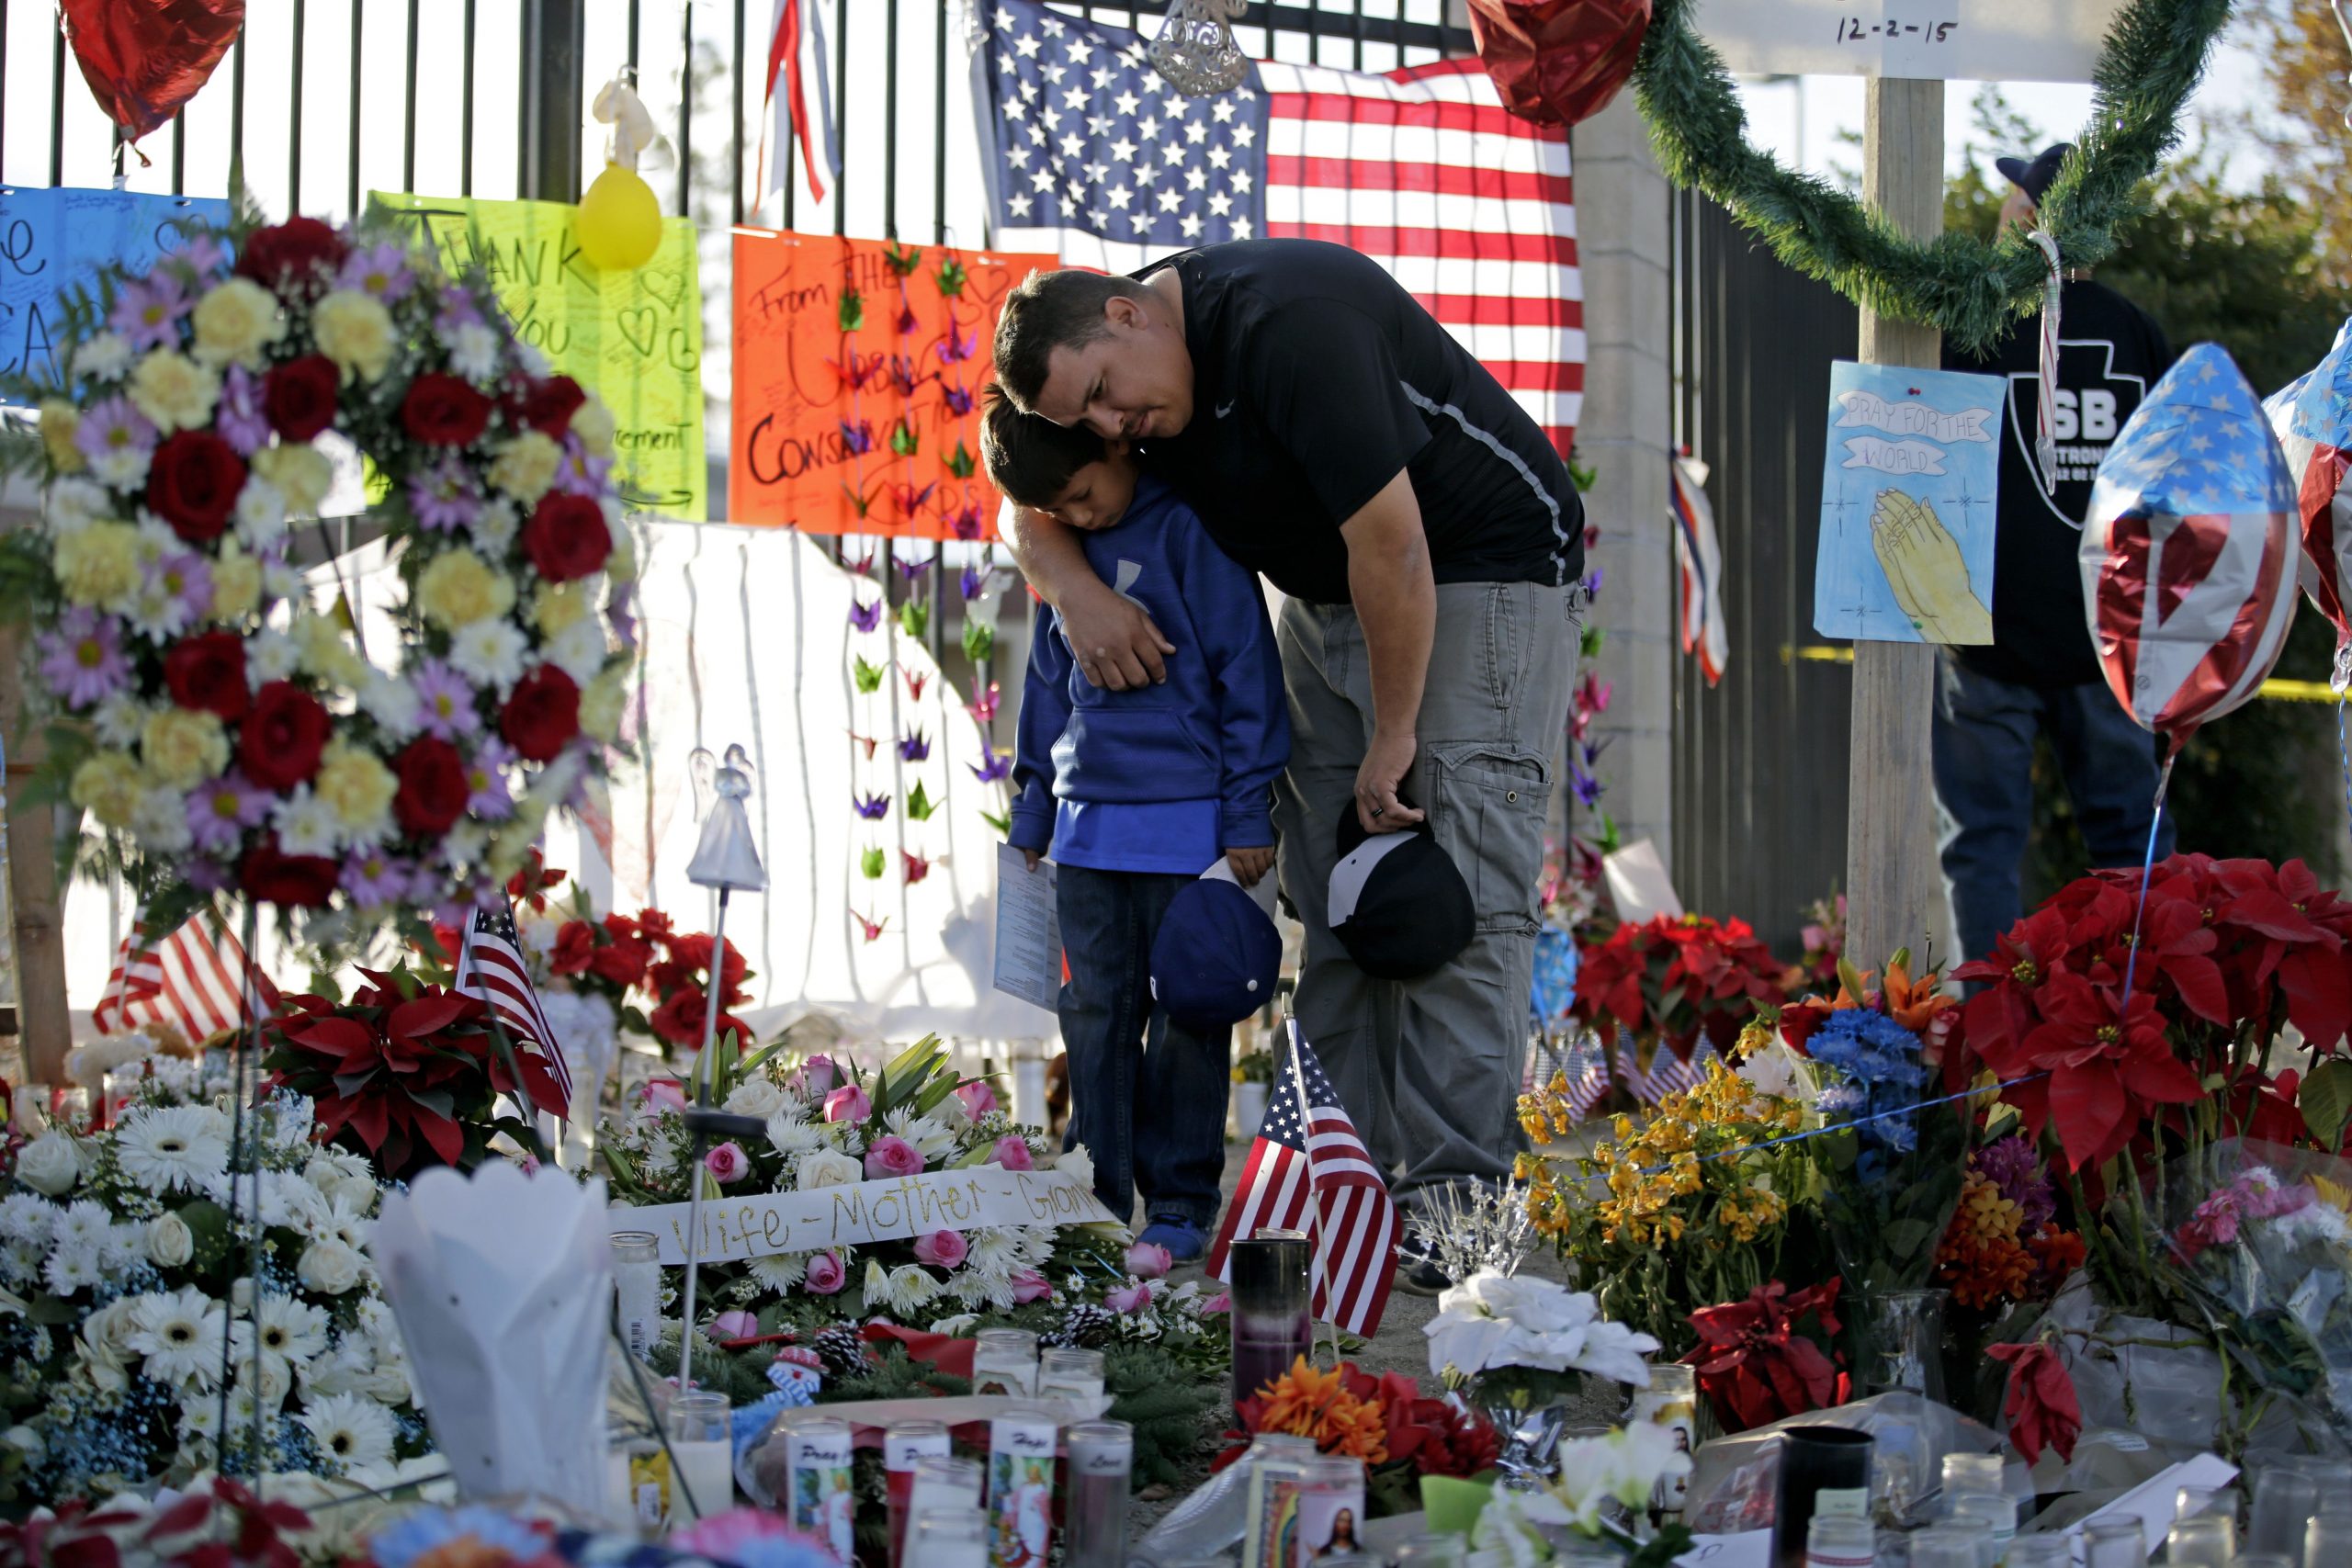 A man and child gather at the site of a Memorial to the victims